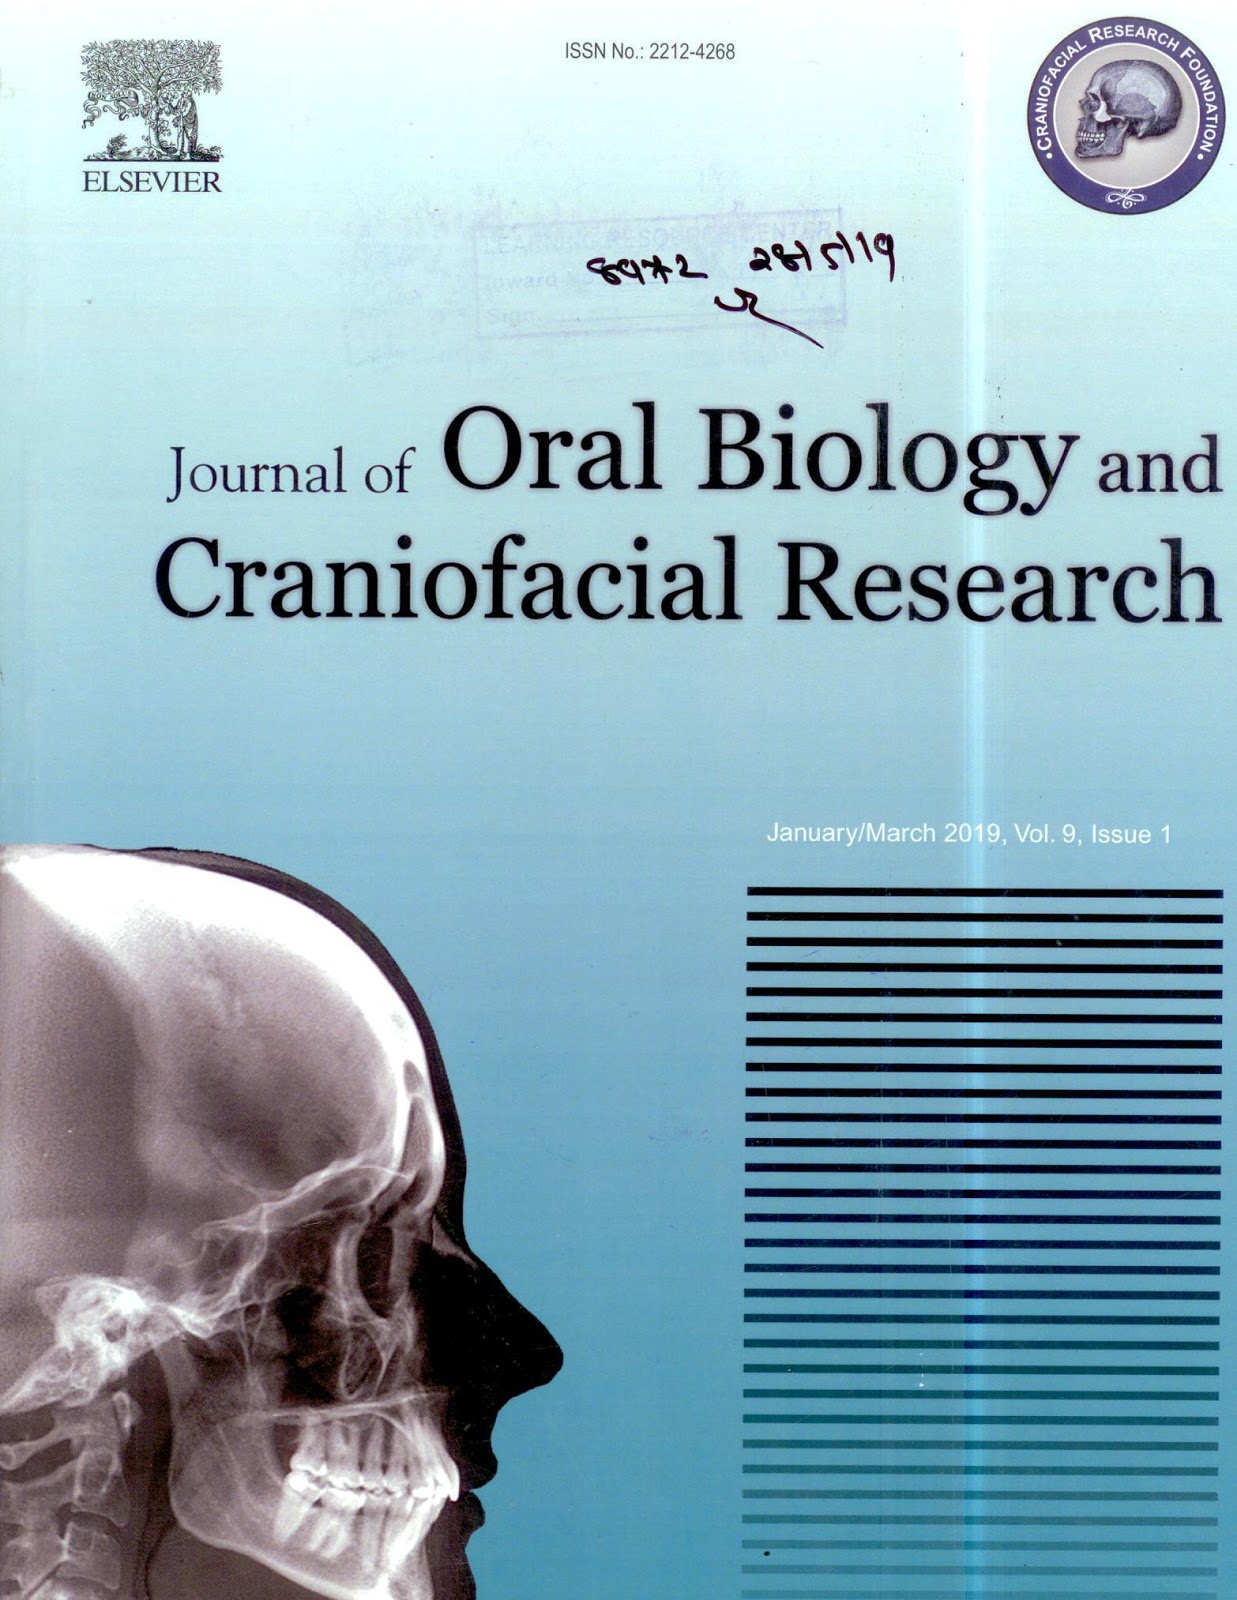 https://www.sciencedirect.com/journal/journal-of-oral-biology-and-craniofacial-research/vol/9/issue/1